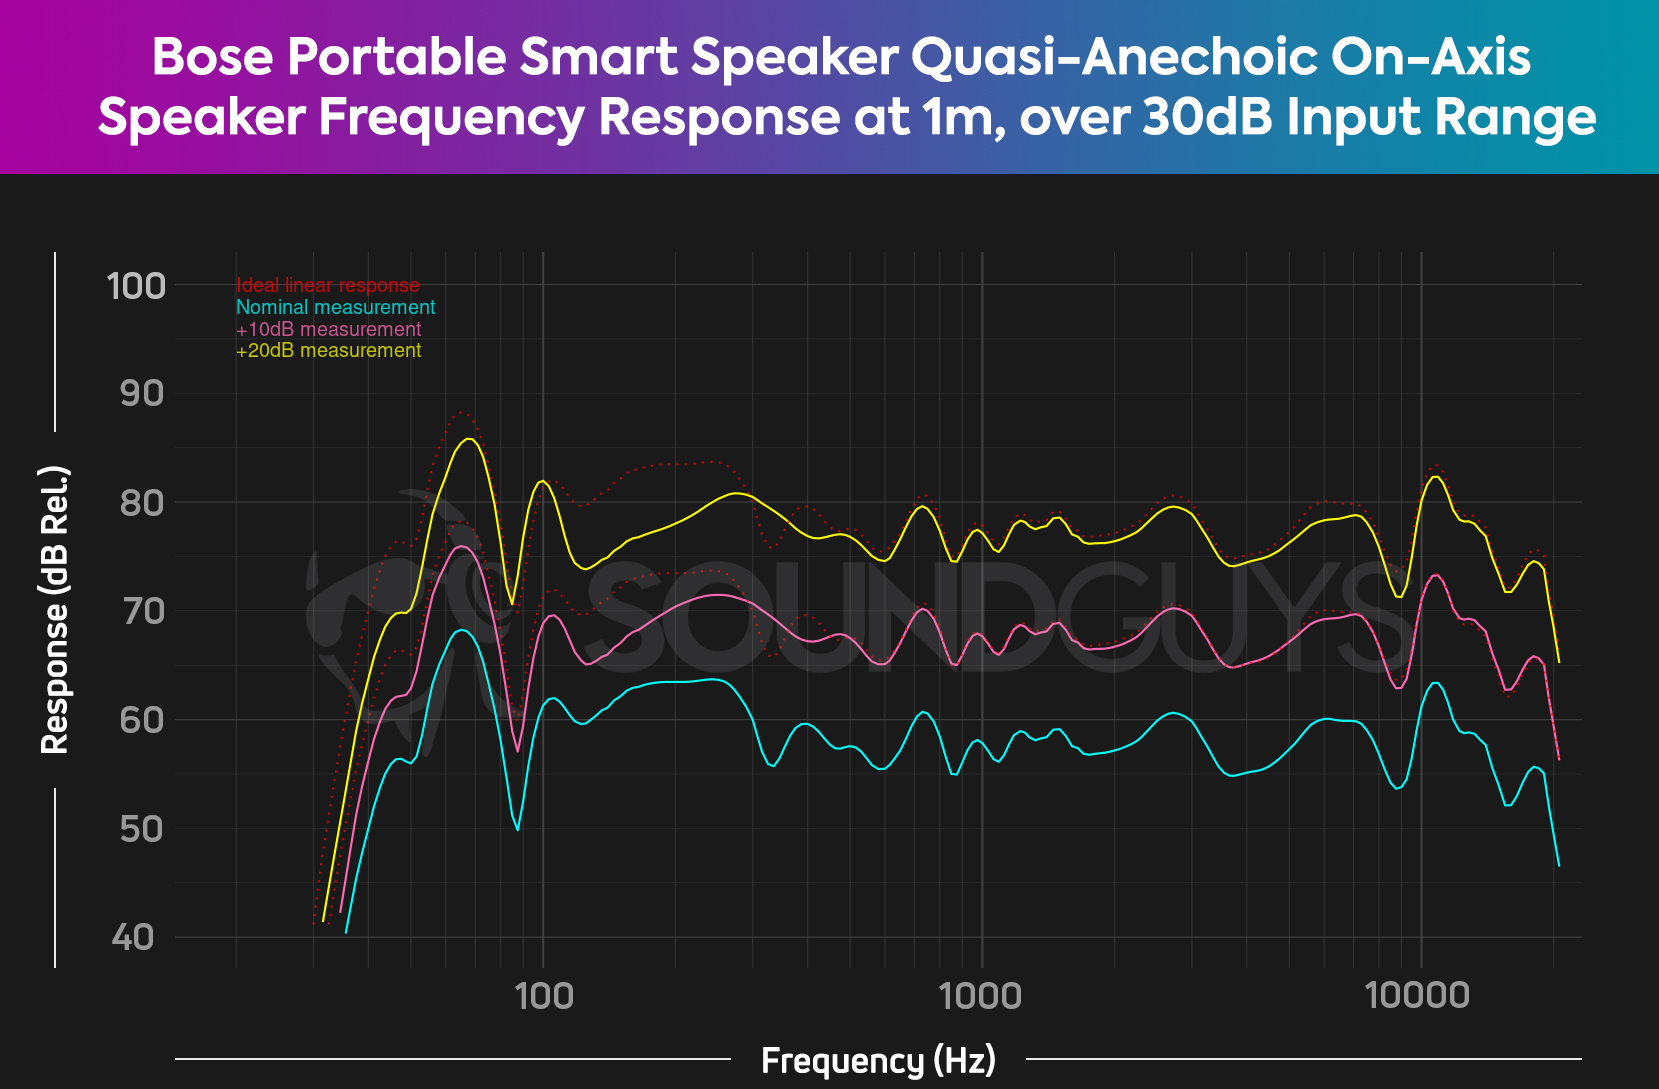 A chart showing three frequency response curves for the Bose Portable Smart Speaker at a nominal level in cyan, +10dB in magenta, and +20dB in yellow.